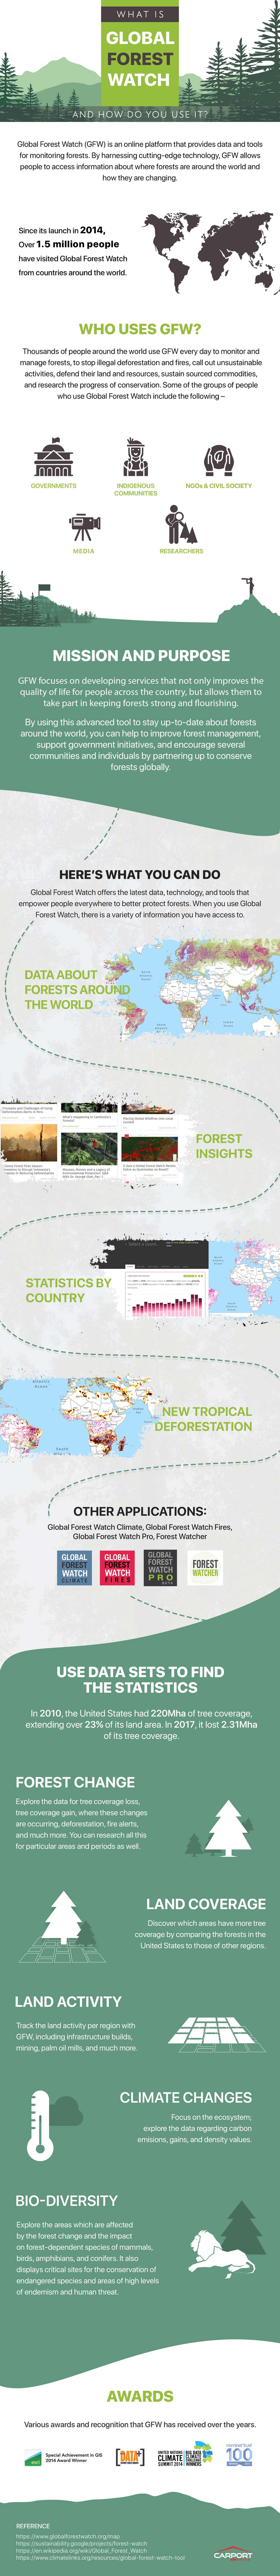 What Is Global Forest Watch and How To Use It